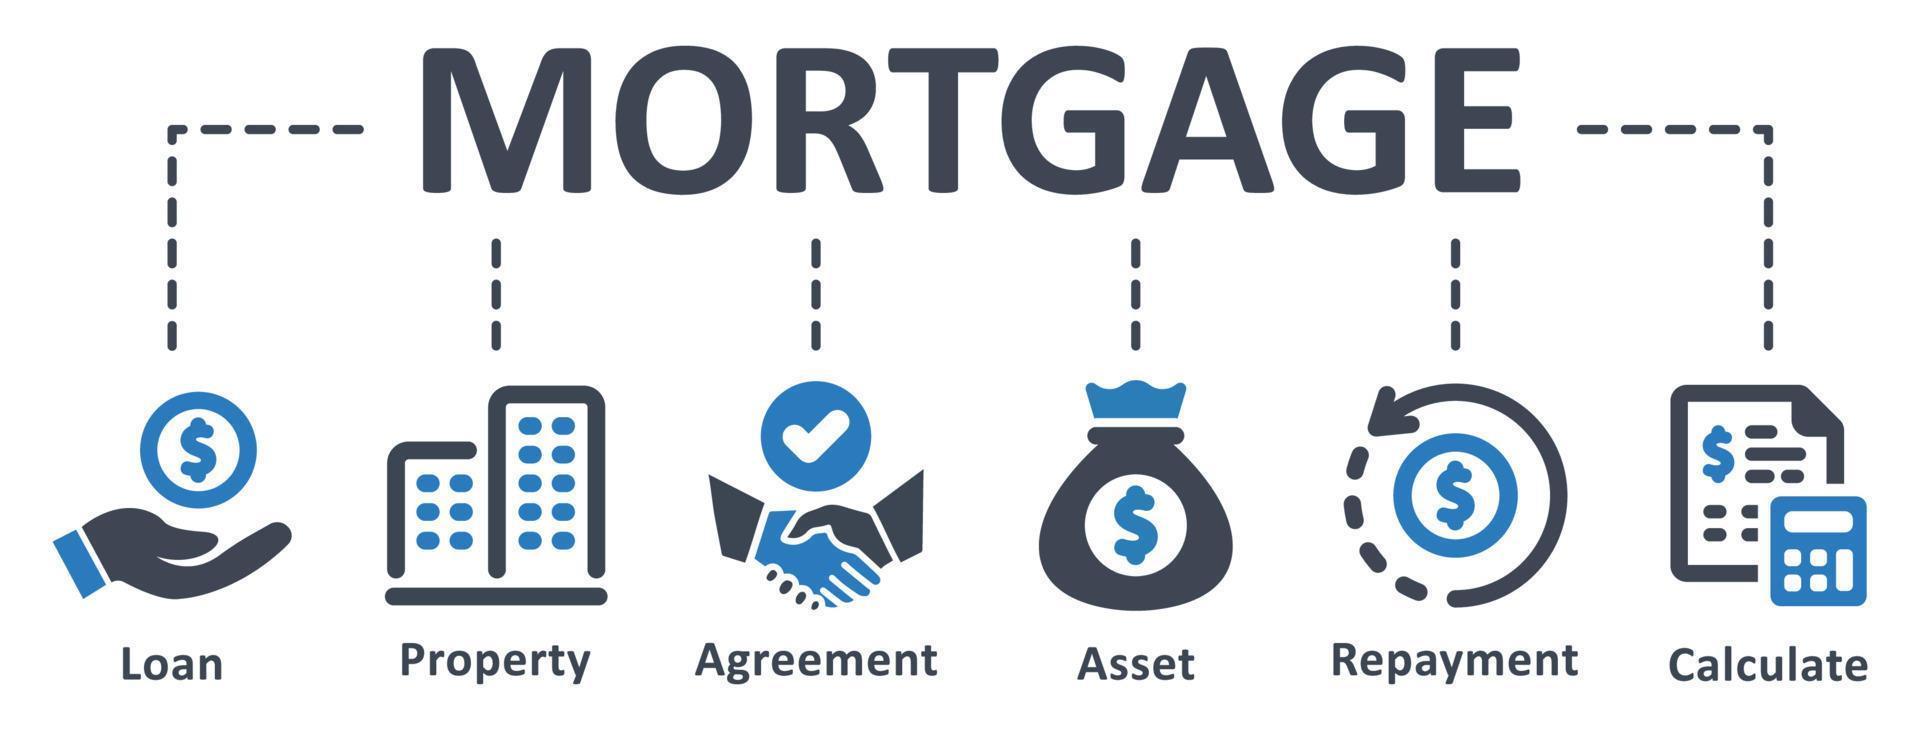 Mortgage icon - vector illustration . mortgage, loan, property, real estate, agreement, asset, repayment, calculate, home, house, infographic, template, concept, banner, pictogram, icon set, icons .